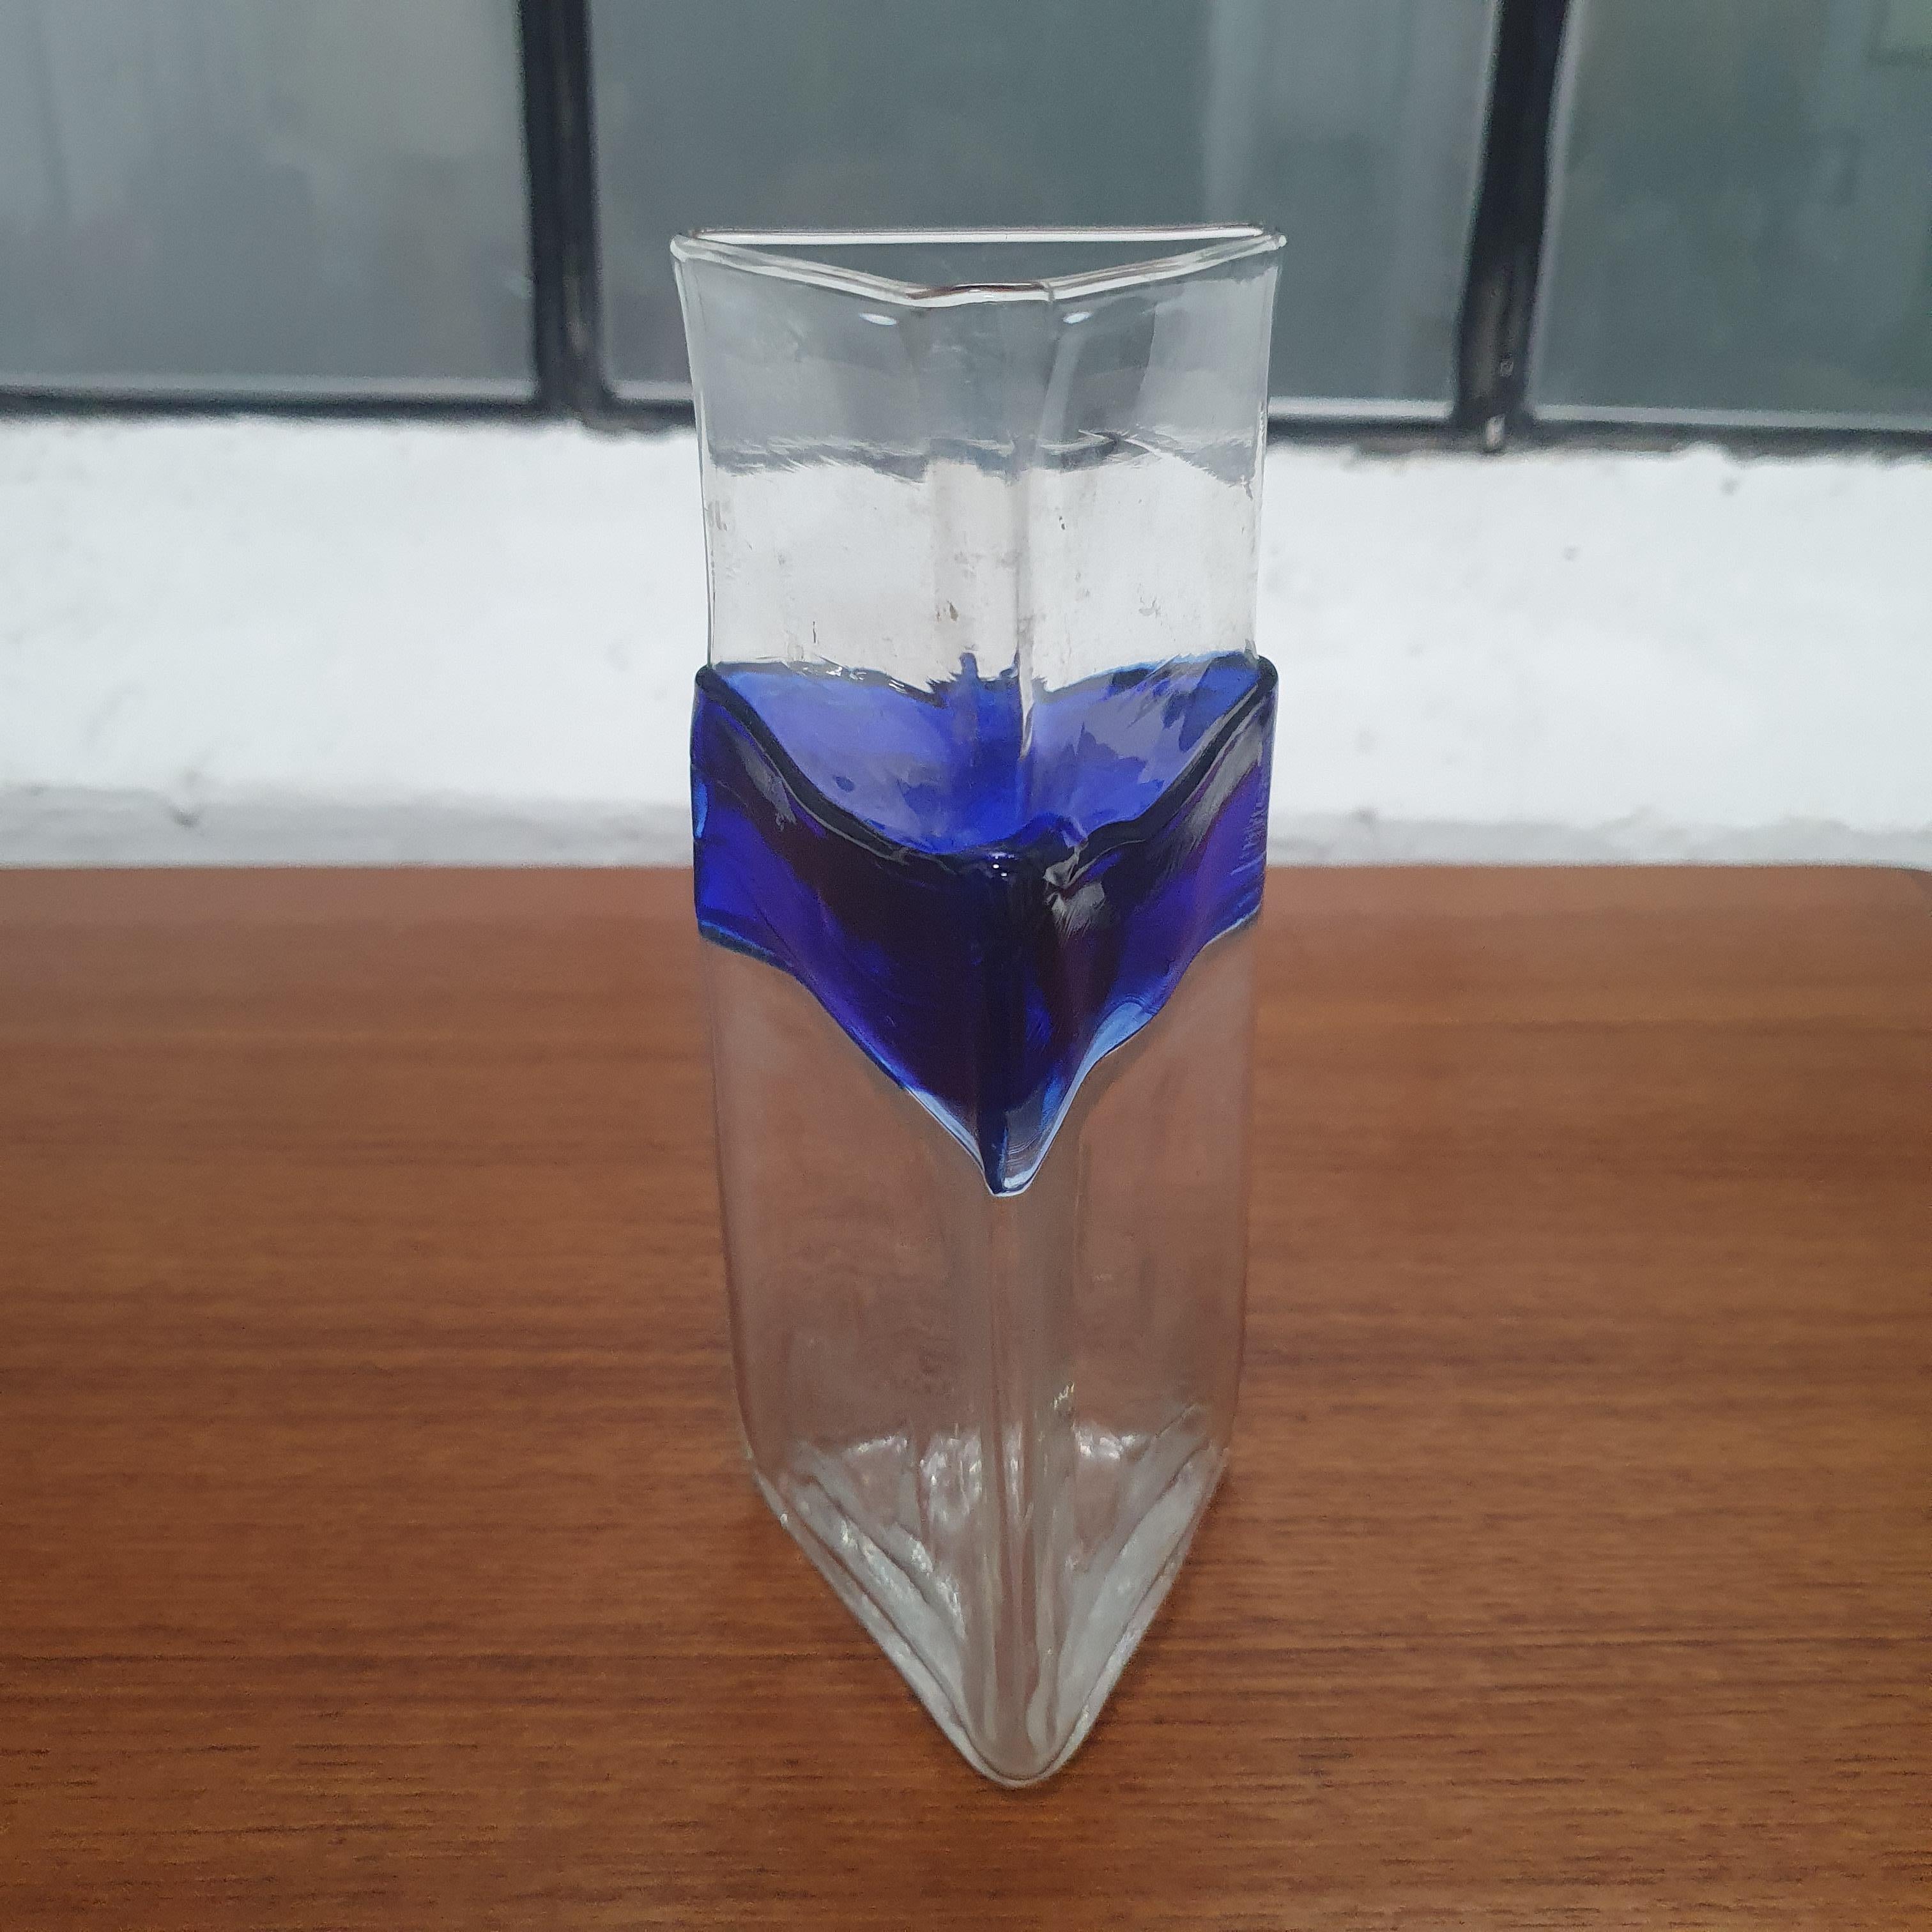 Murano glass vase by Carlo Nason, signed '99.

Triangle shaped, 3.25 in x 7.5 in high.